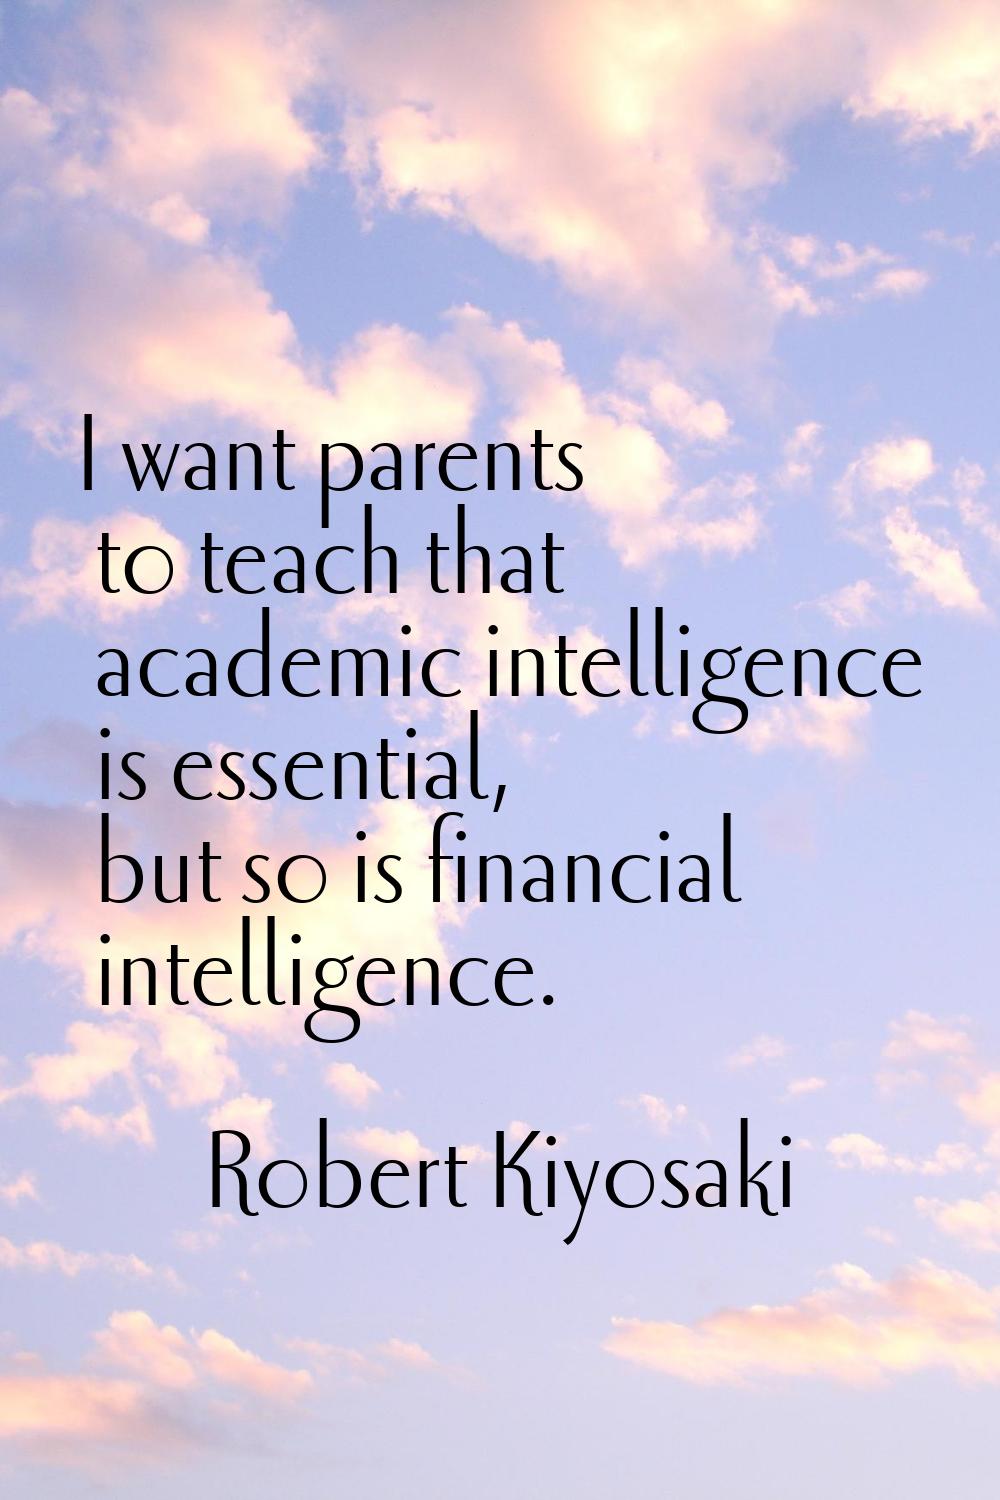 I want parents to teach that academic intelligence is essential, but so is financial intelligence.